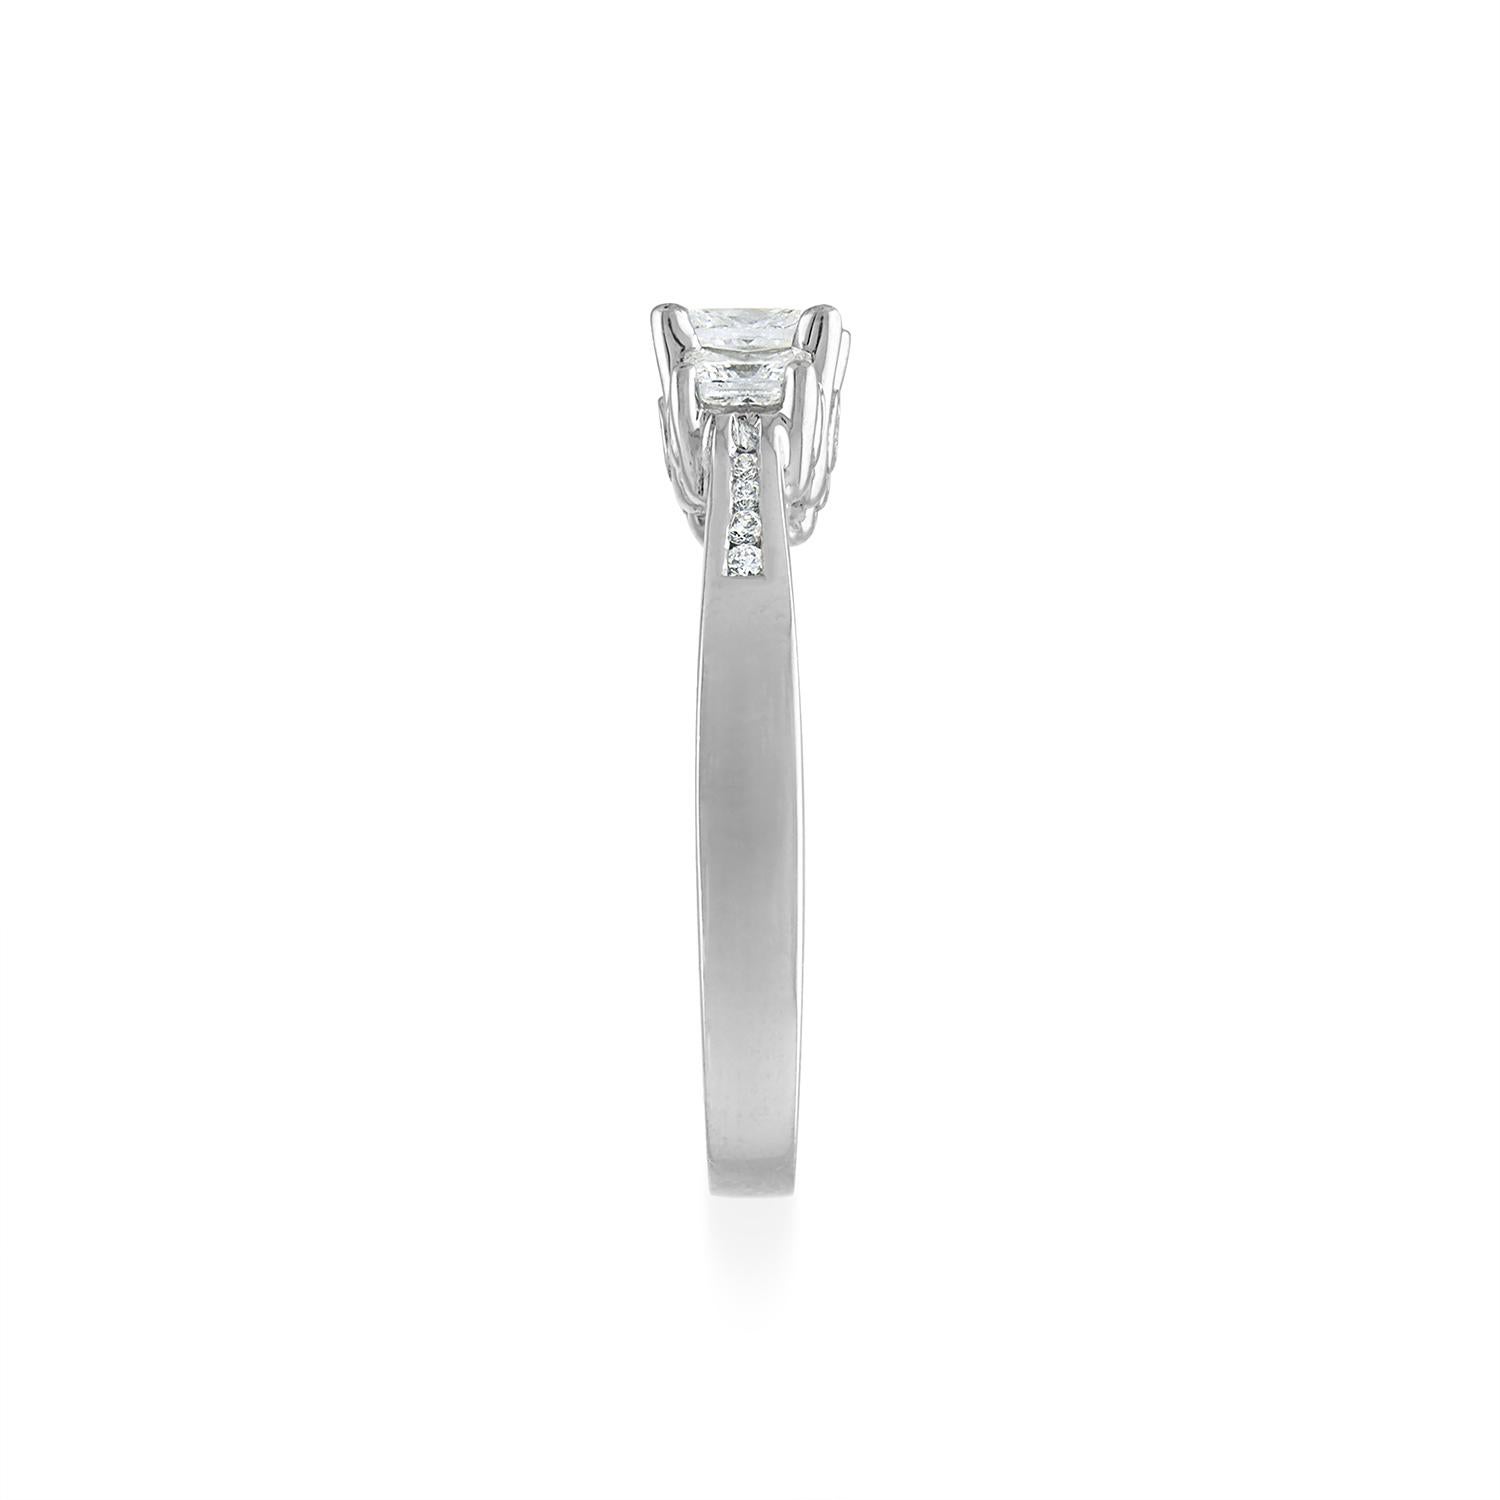 1.10 Ct Total Weight, Platinum Diamond Ring, Princess cut center stones
Three center Princess cut diamonds, accented by 16 Diamonds set in the shank and gallery.

Metal: Platinum
Diamond Shape: Princess cut, and Round Brilliant
Total Diamond Weight: